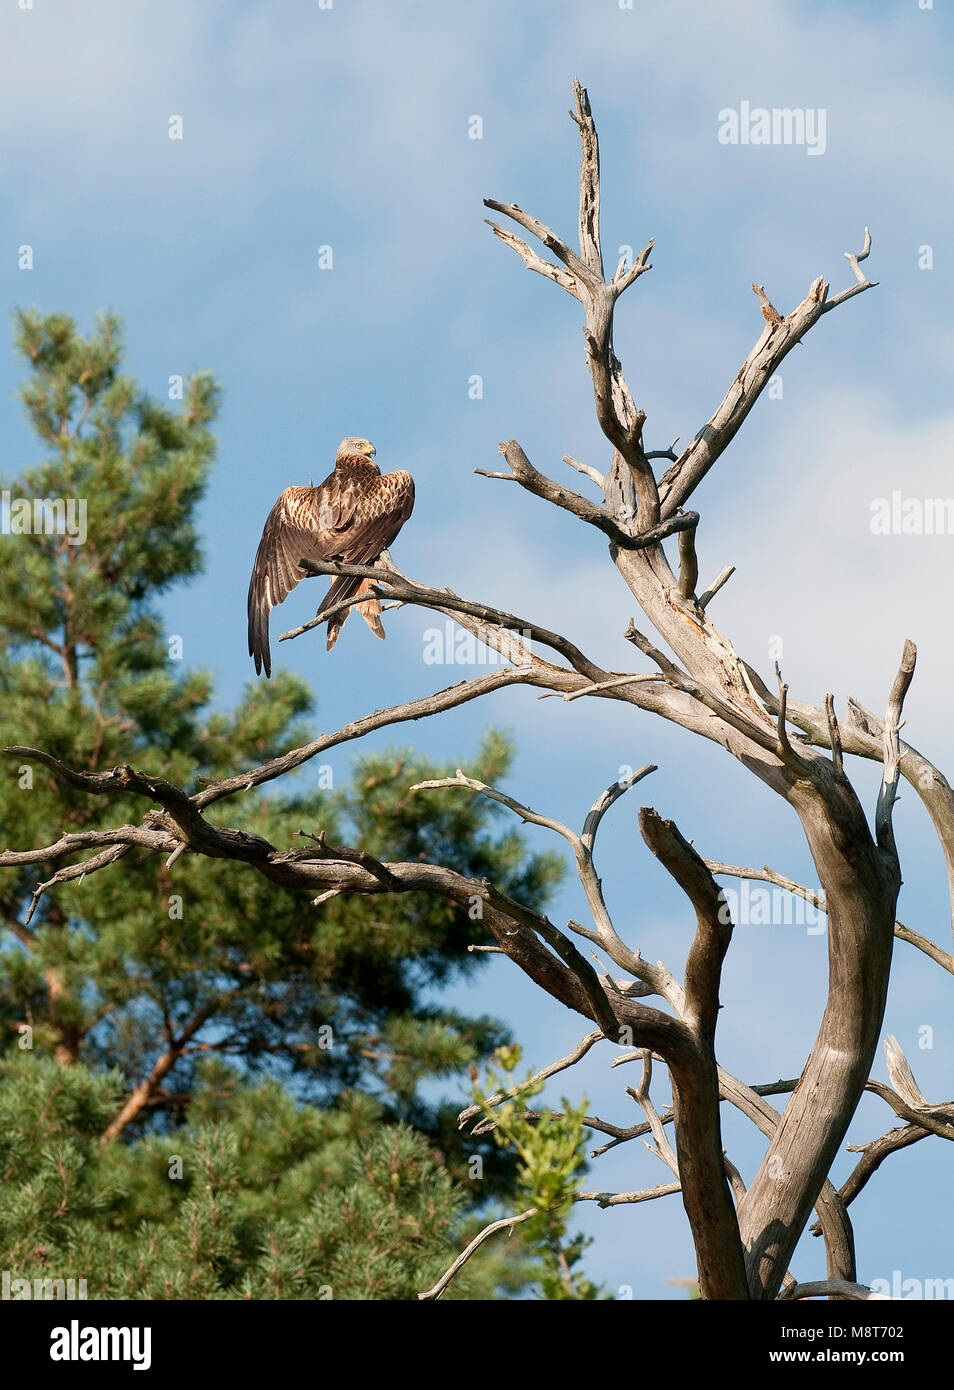 Rode Wouw in dode boom; Red Kite perched in dead tree Stock Photo